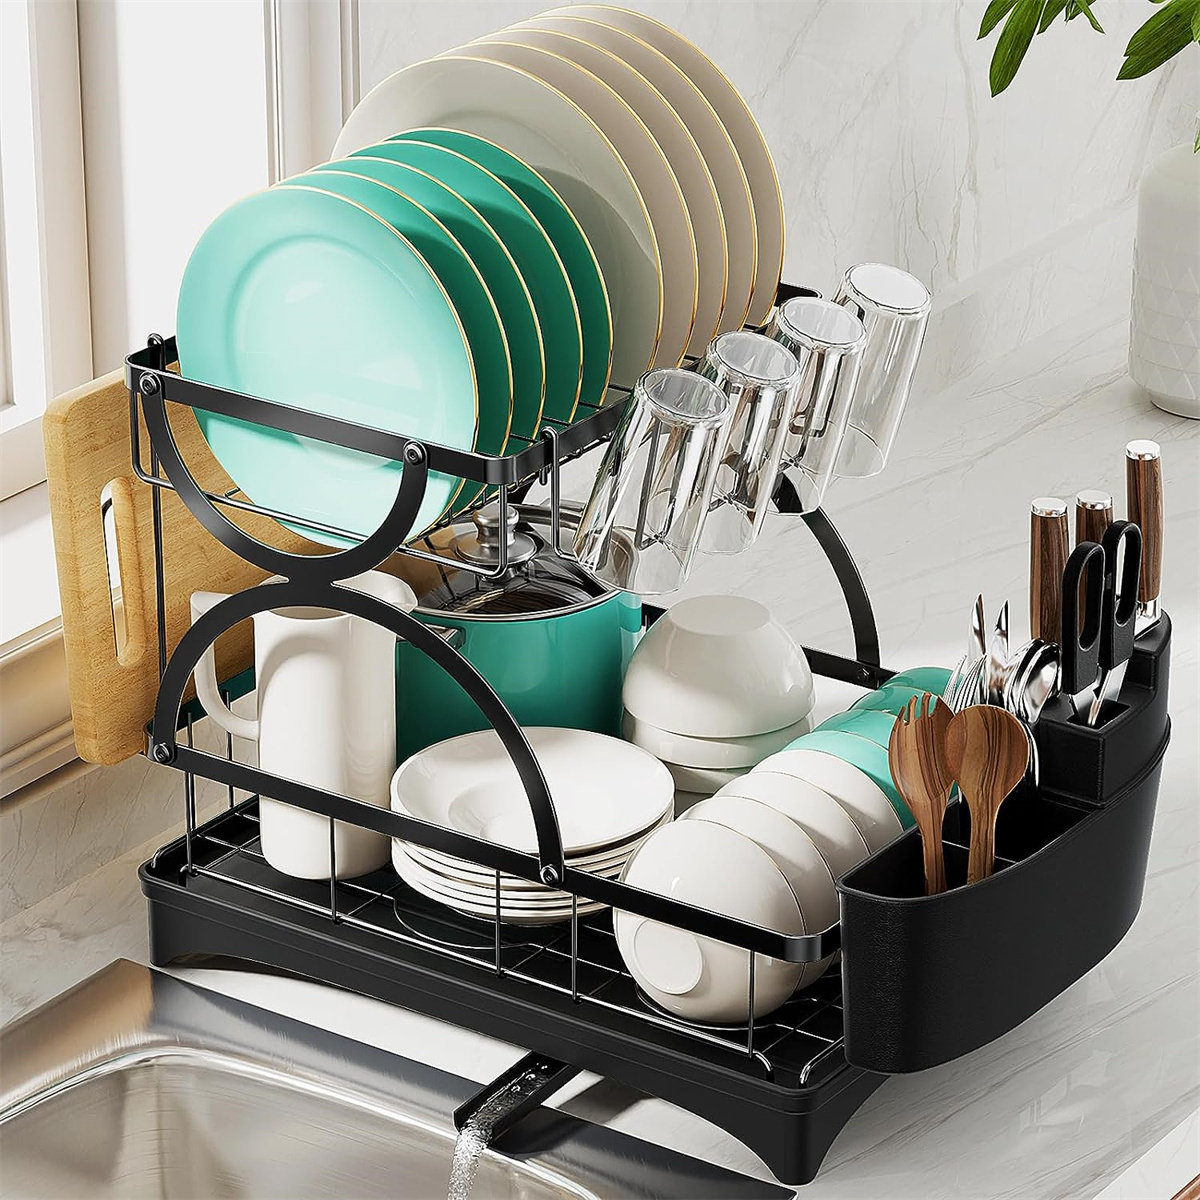 BOOSINY Dish Drying Rack and Drainboard Set for Kitchen Counter, 2 Tier  Large Stainless Steel Sink Organizer Dish Racks with Cups Holder, Utensil